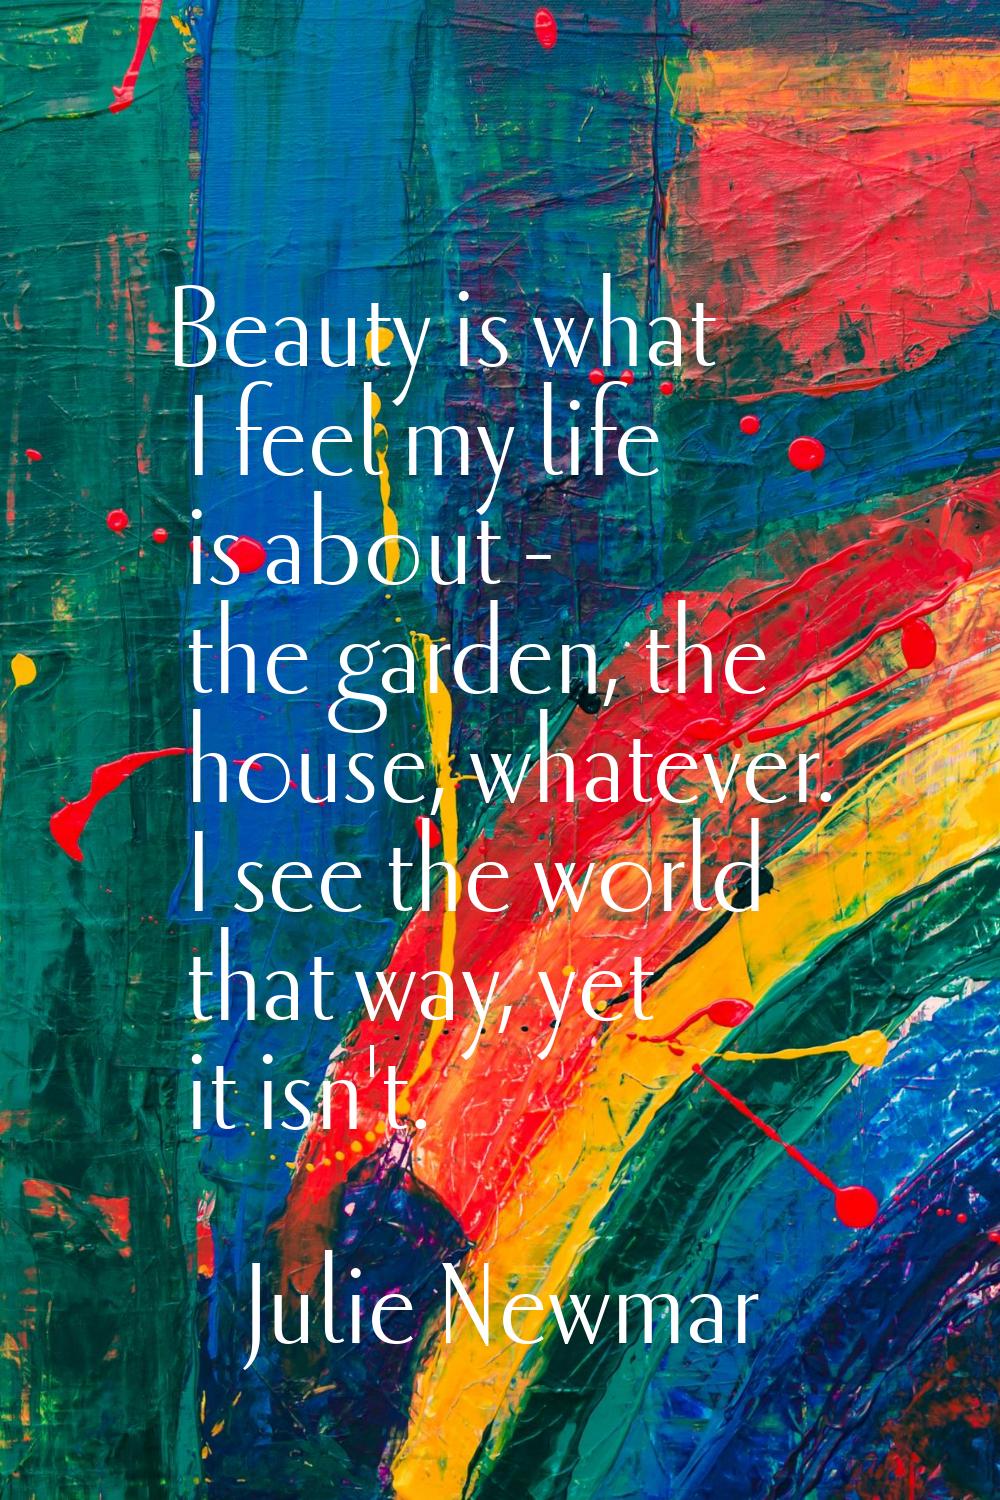 Beauty is what I feel my life is about - the garden, the house, whatever. I see the world that way,